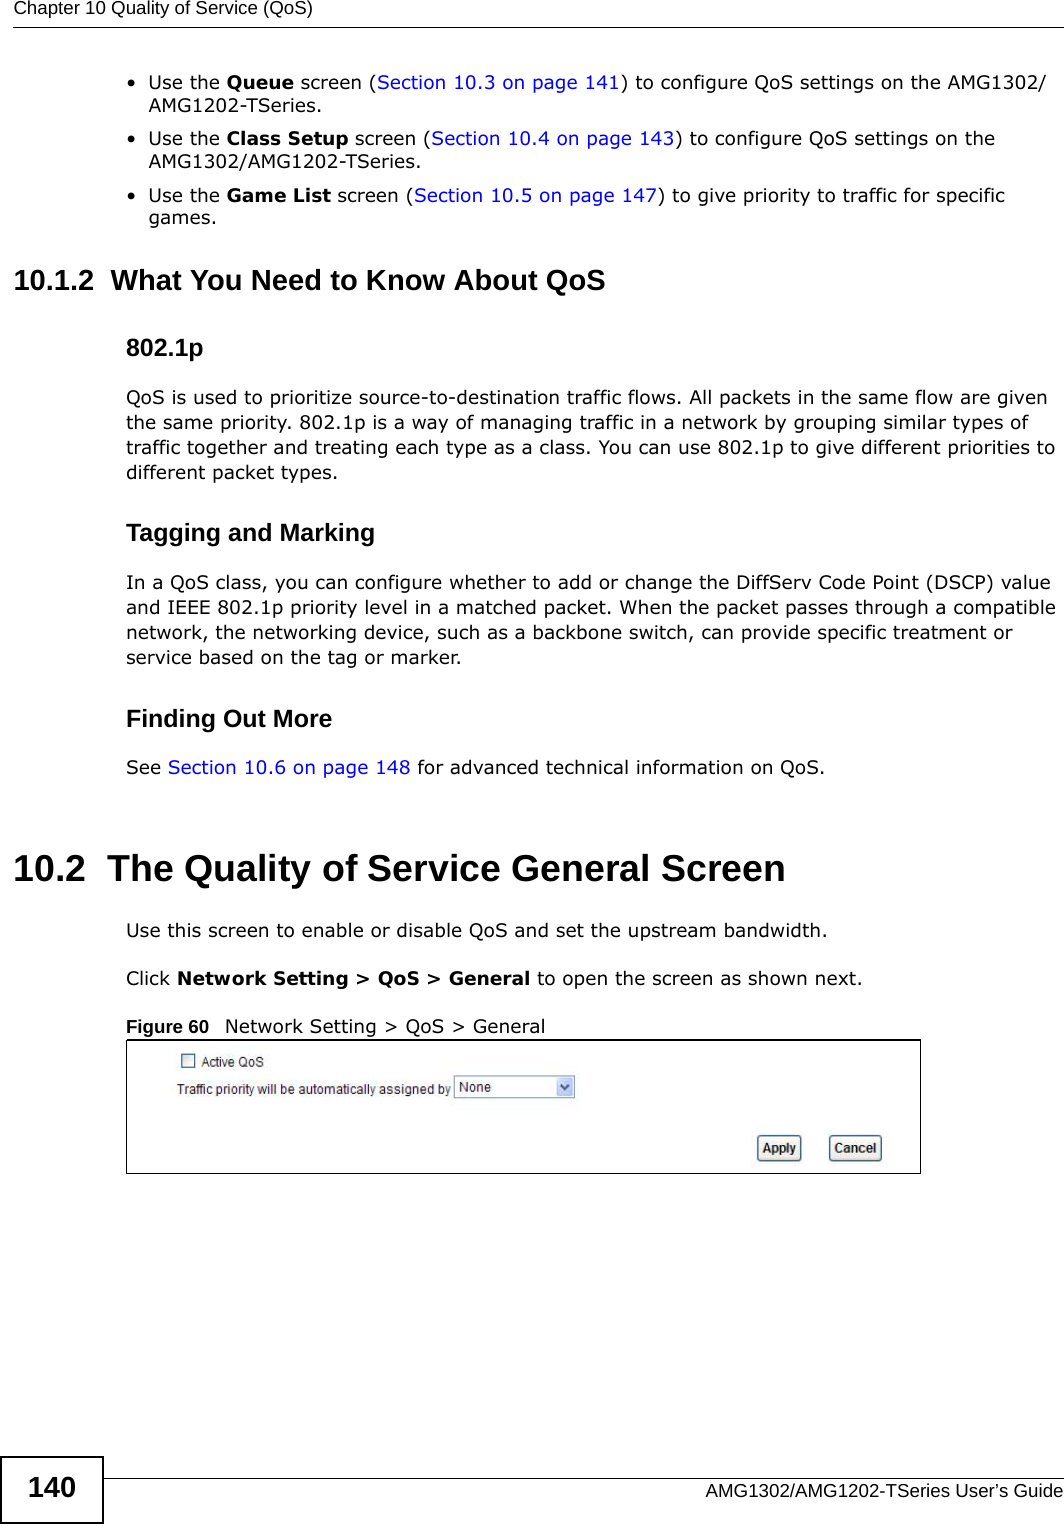 Chapter 10 Quality of Service (QoS)AMG1302/AMG1202-TSeries User’s Guide140•Use the Queue screen (Section 10.3 on page 141) to configure QoS settings on the AMG1302/AMG1202-TSeries.•Use the Class Setup screen (Section 10.4 on page 143) to configure QoS settings on the AMG1302/AMG1202-TSeries.•Use the Game List screen (Section 10.5 on page 147) to give priority to traffic for specific games.10.1.2  What You Need to Know About QoS802.1pQoS is used to prioritize source-to-destination traffic flows. All packets in the same flow are given the same priority. 802.1p is a way of managing traffic in a network by grouping similar types of traffic together and treating each type as a class. You can use 802.1p to give different priorities to different packet types. Tagging and MarkingIn a QoS class, you can configure whether to add or change the DiffServ Code Point (DSCP) value and IEEE 802.1p priority level in a matched packet. When the packet passes through a compatible network, the networking device, such as a backbone switch, can provide specific treatment or service based on the tag or marker.Finding Out MoreSee Section 10.6 on page 148 for advanced technical information on QoS.10.2  The Quality of Service General ScreenUse this screen to enable or disable QoS and set the upstream bandwidth.Click Network Setting &gt; QoS &gt; General to open the screen as shown next.Figure 60   Network Setting &gt; QoS &gt; General